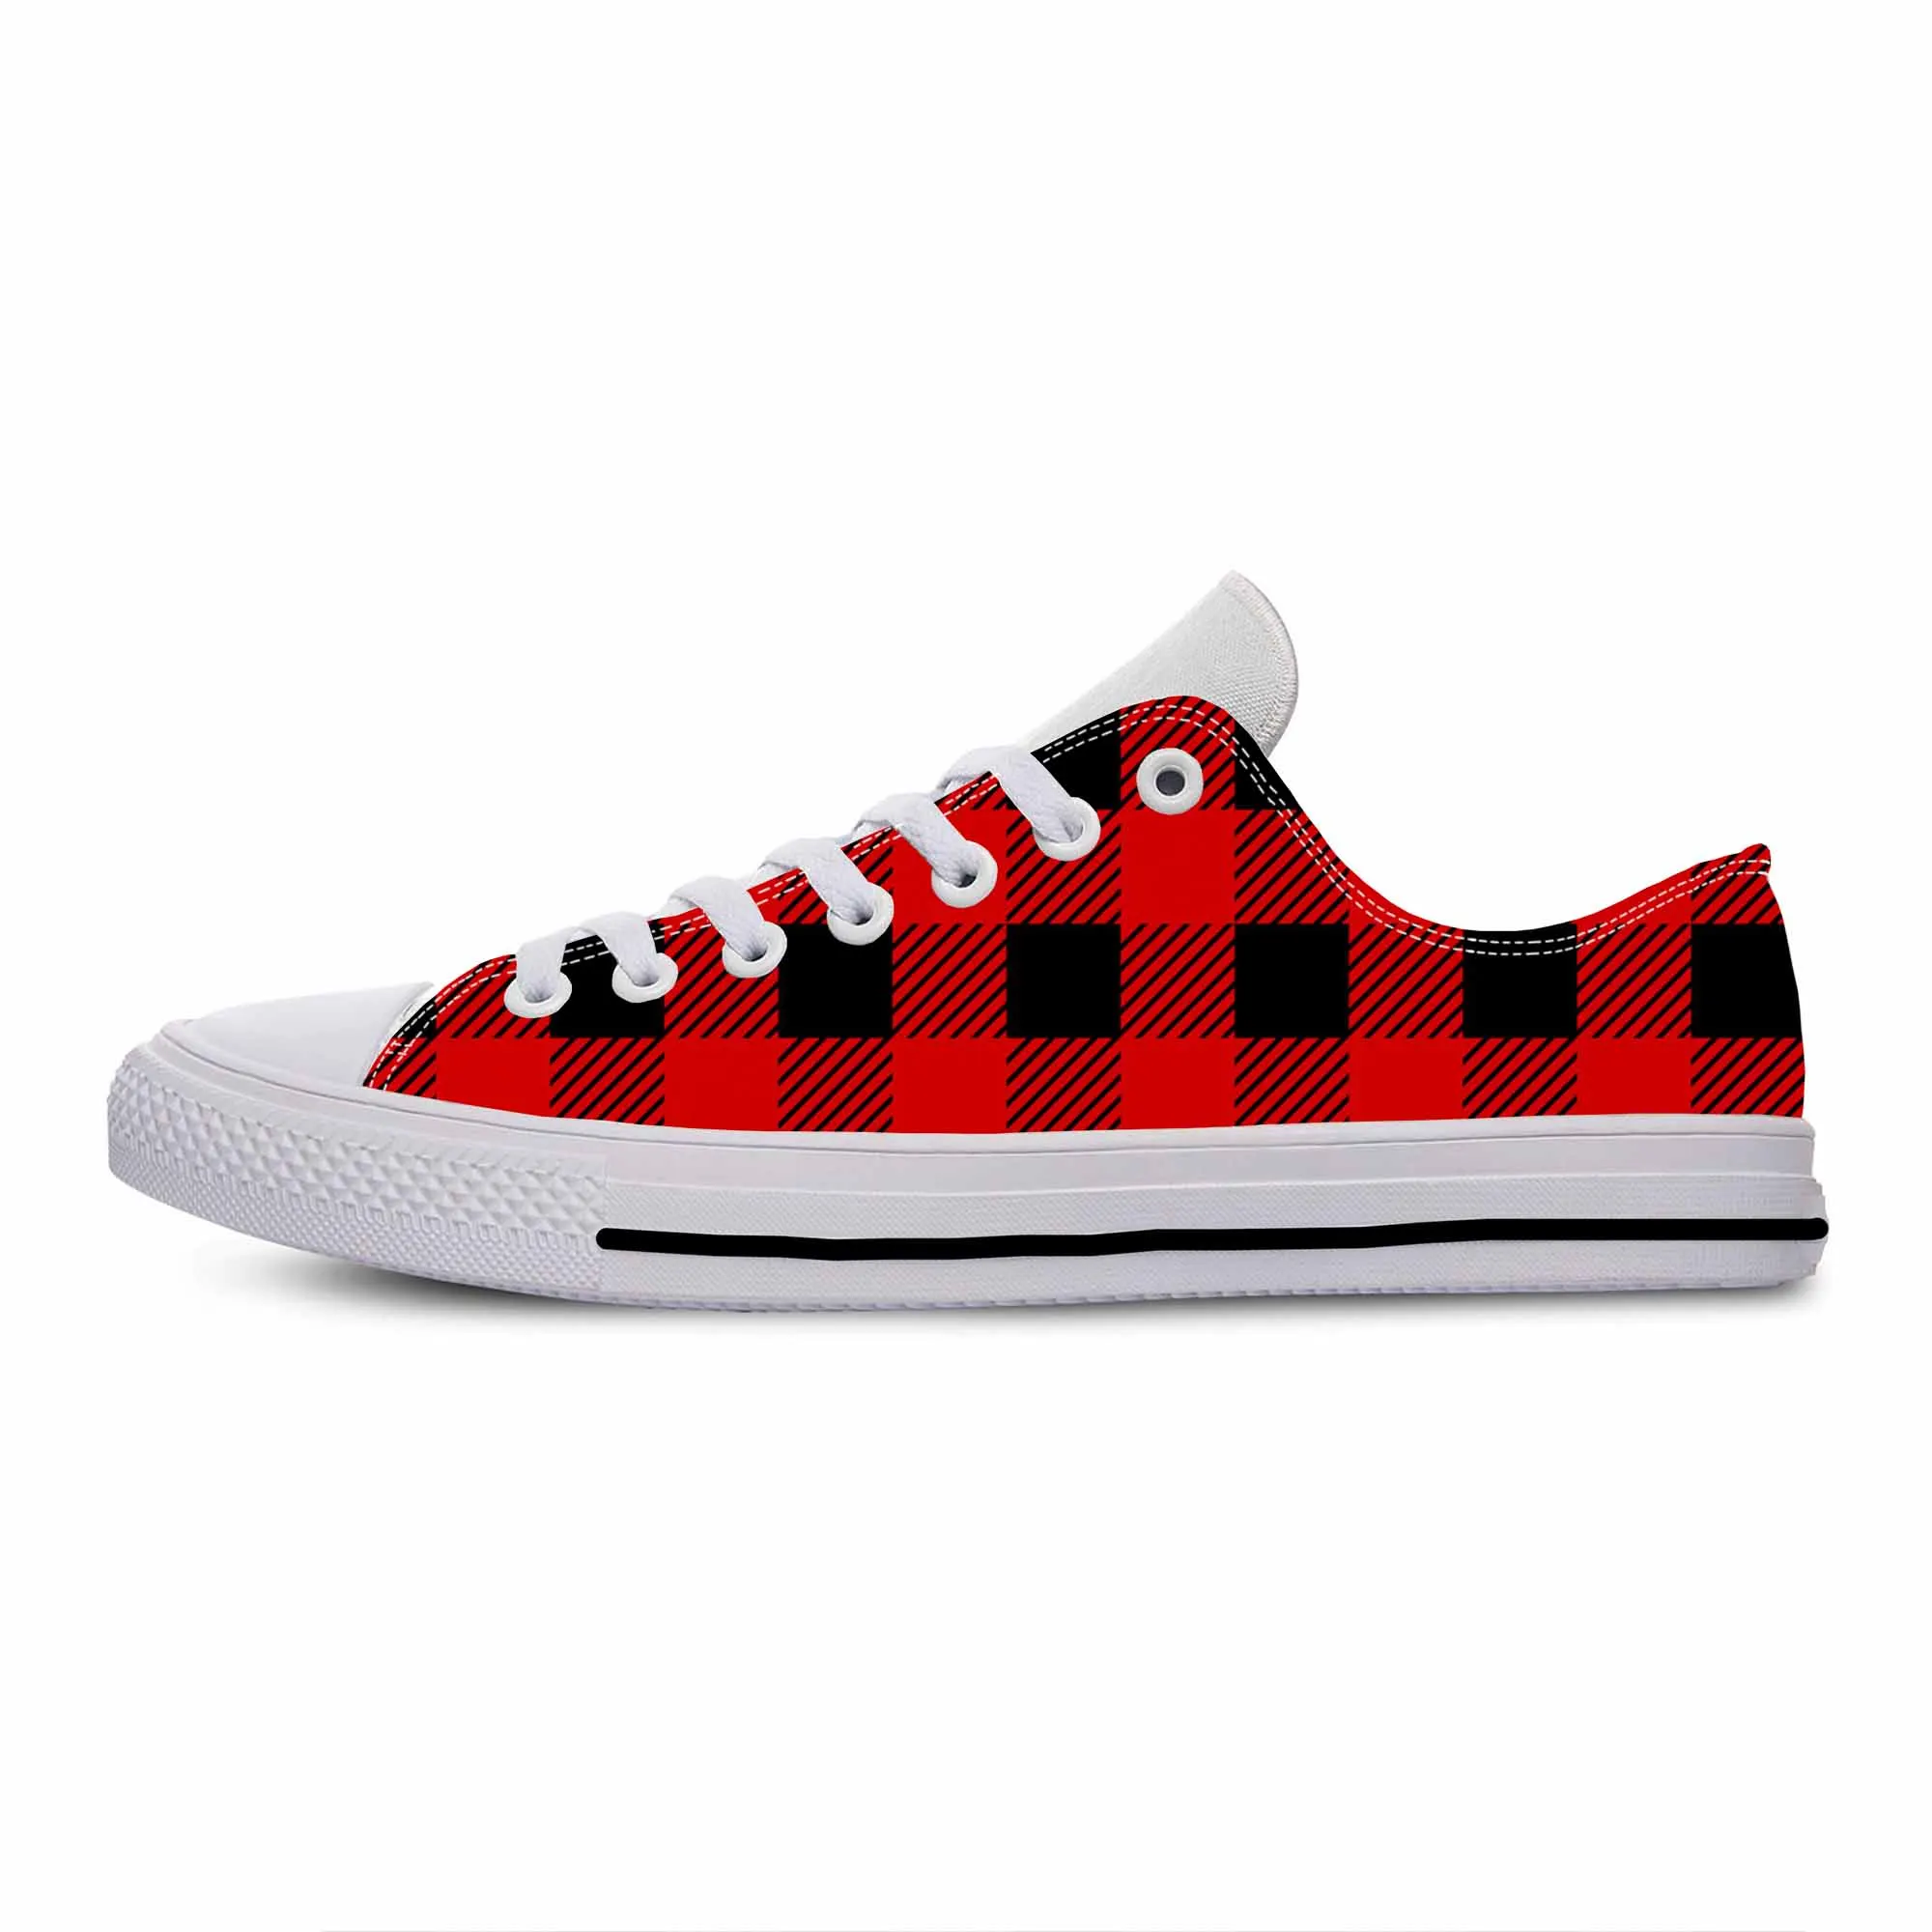 

Hot Buffalo Plaid Check Scottish Tartan Aesthetic Casual Cloth Shoes Low Top Breathable Lightweight 3D Print Men Women Sneakers